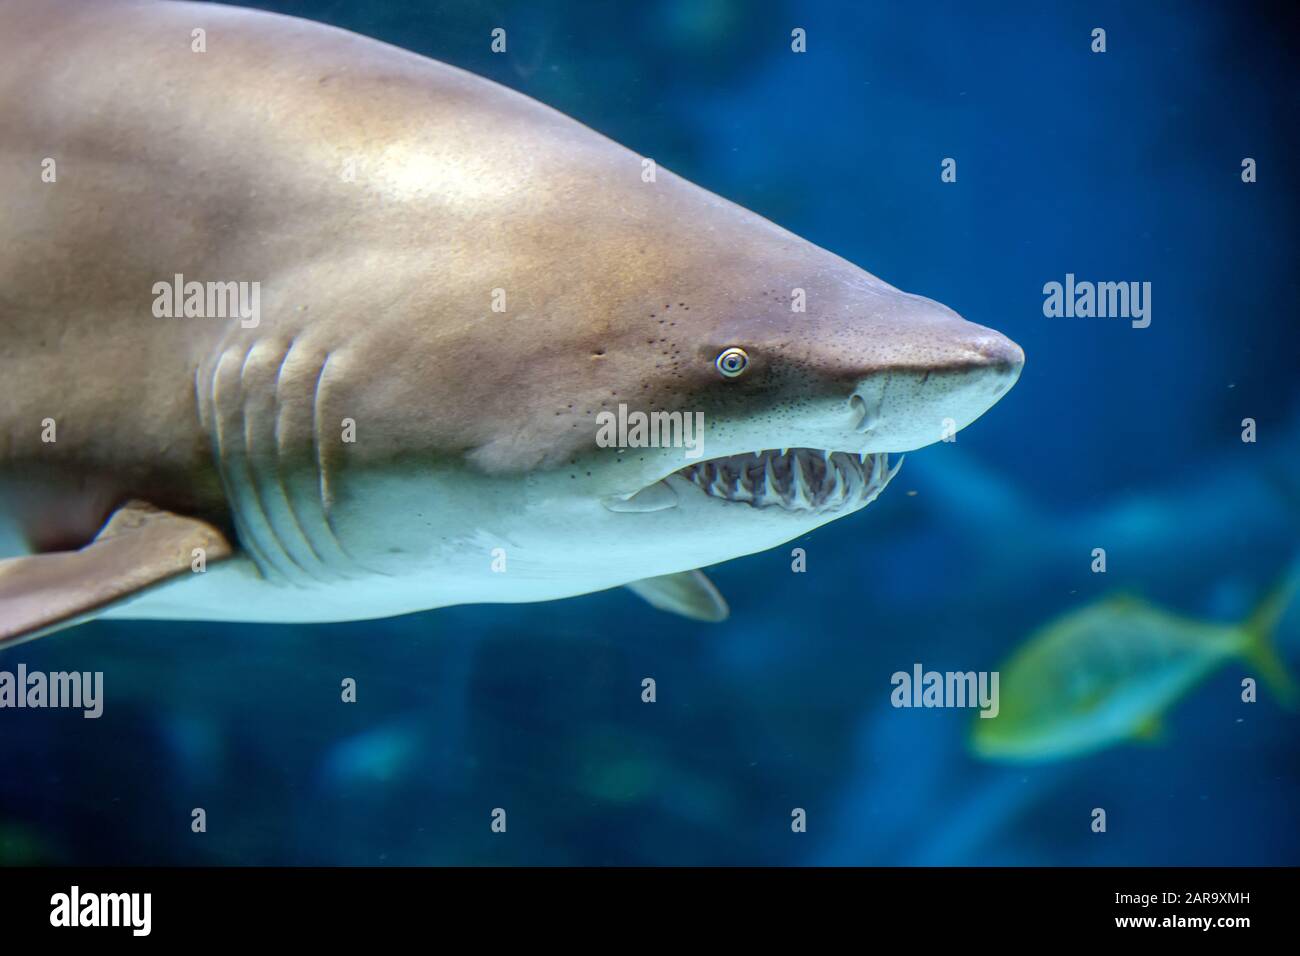 Close up underwater grand requin blanc Banque D'Images